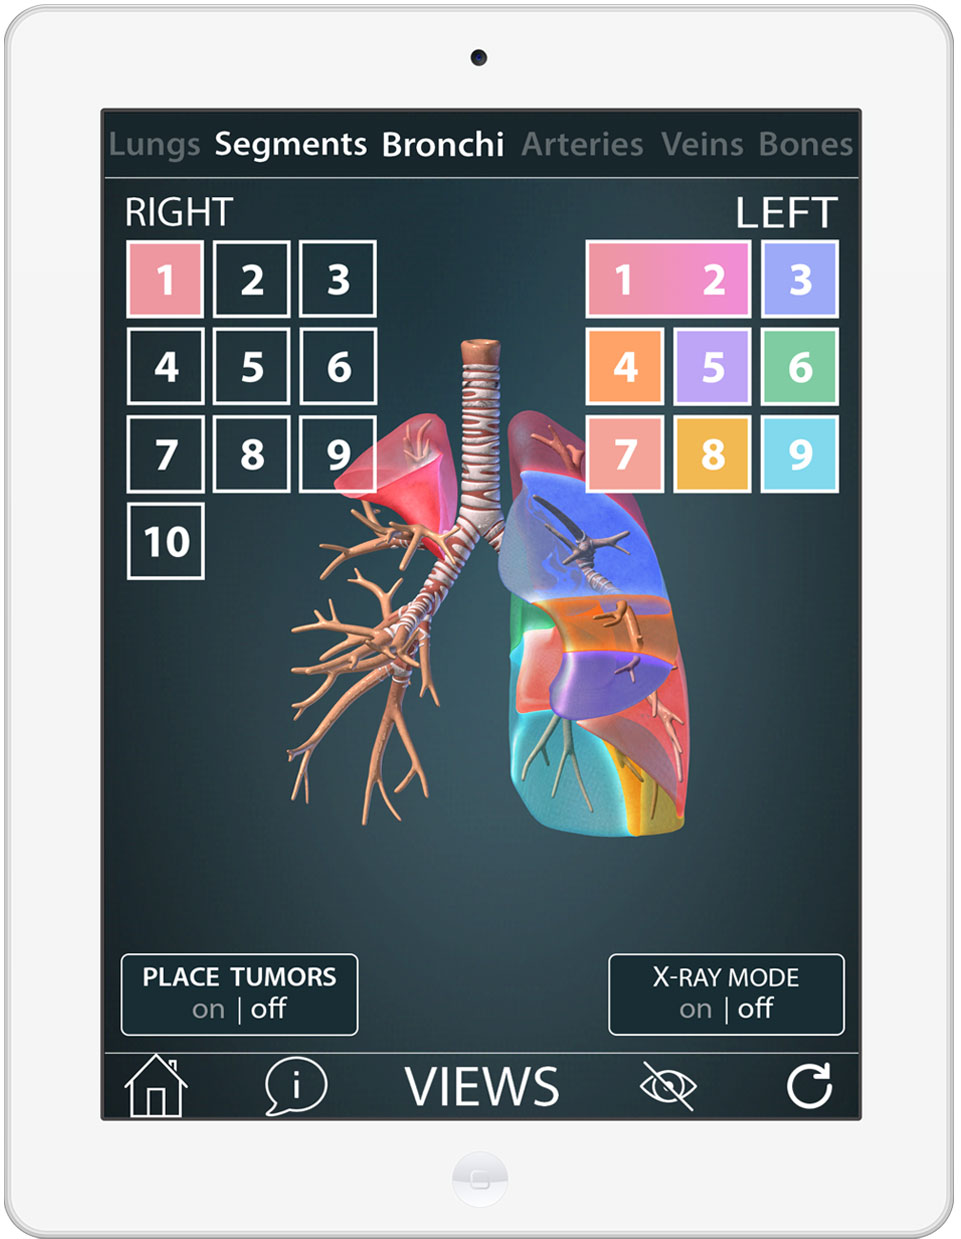 CSAT's Surgical Anatomy of the Lung app